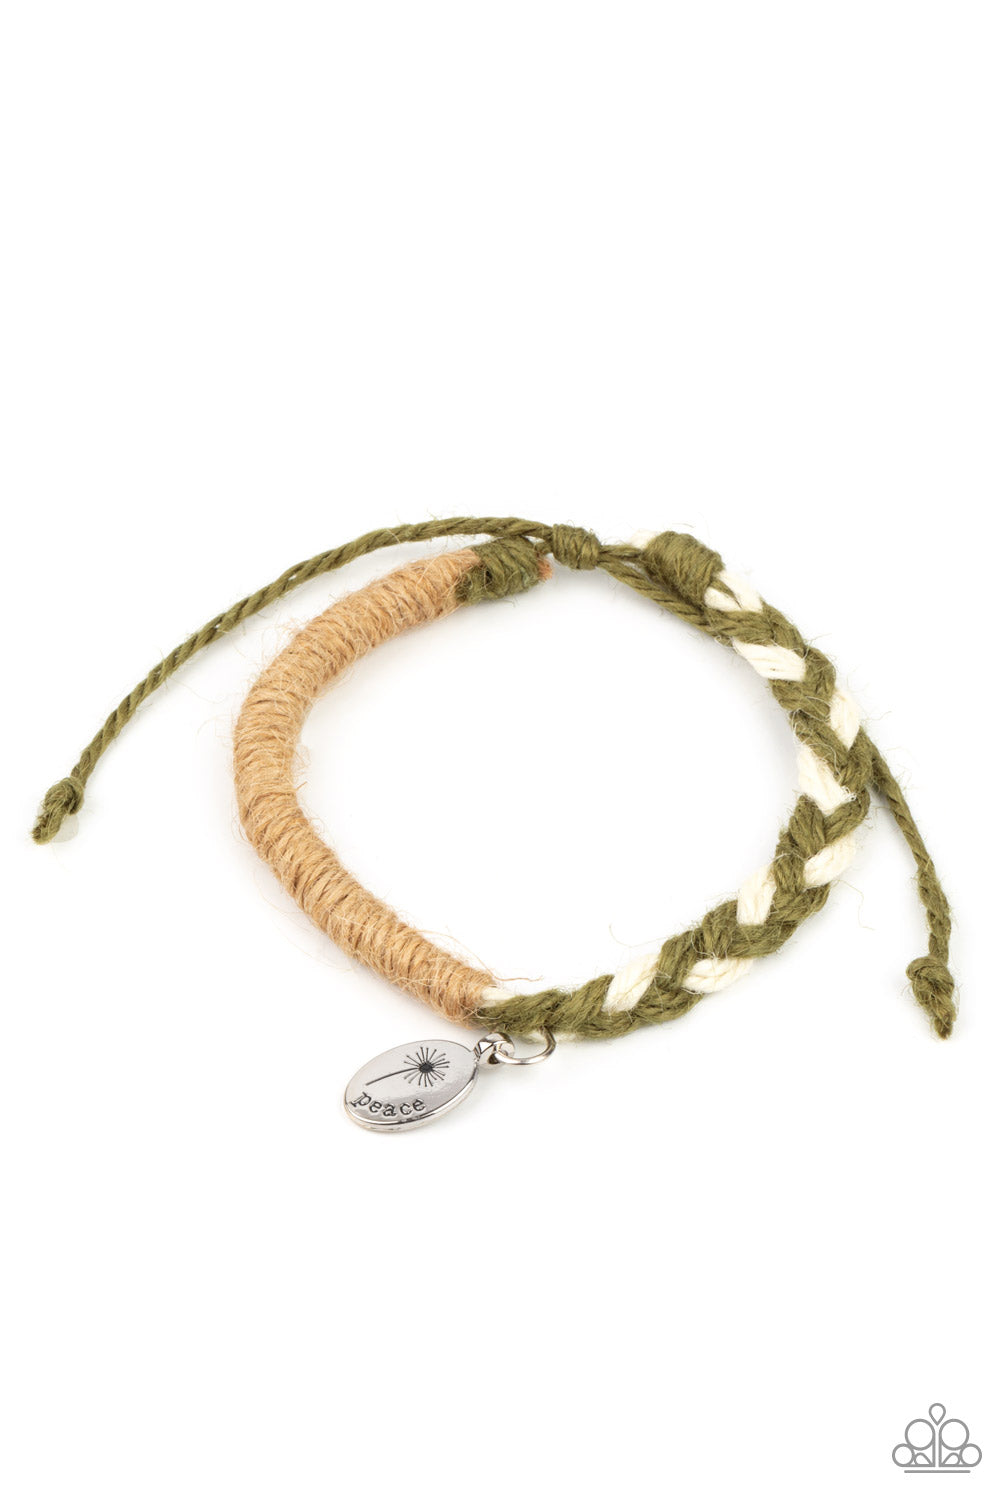 five-dollar-jewelry-perpetually-peaceful-green-bracelet-paparazzi-accessories